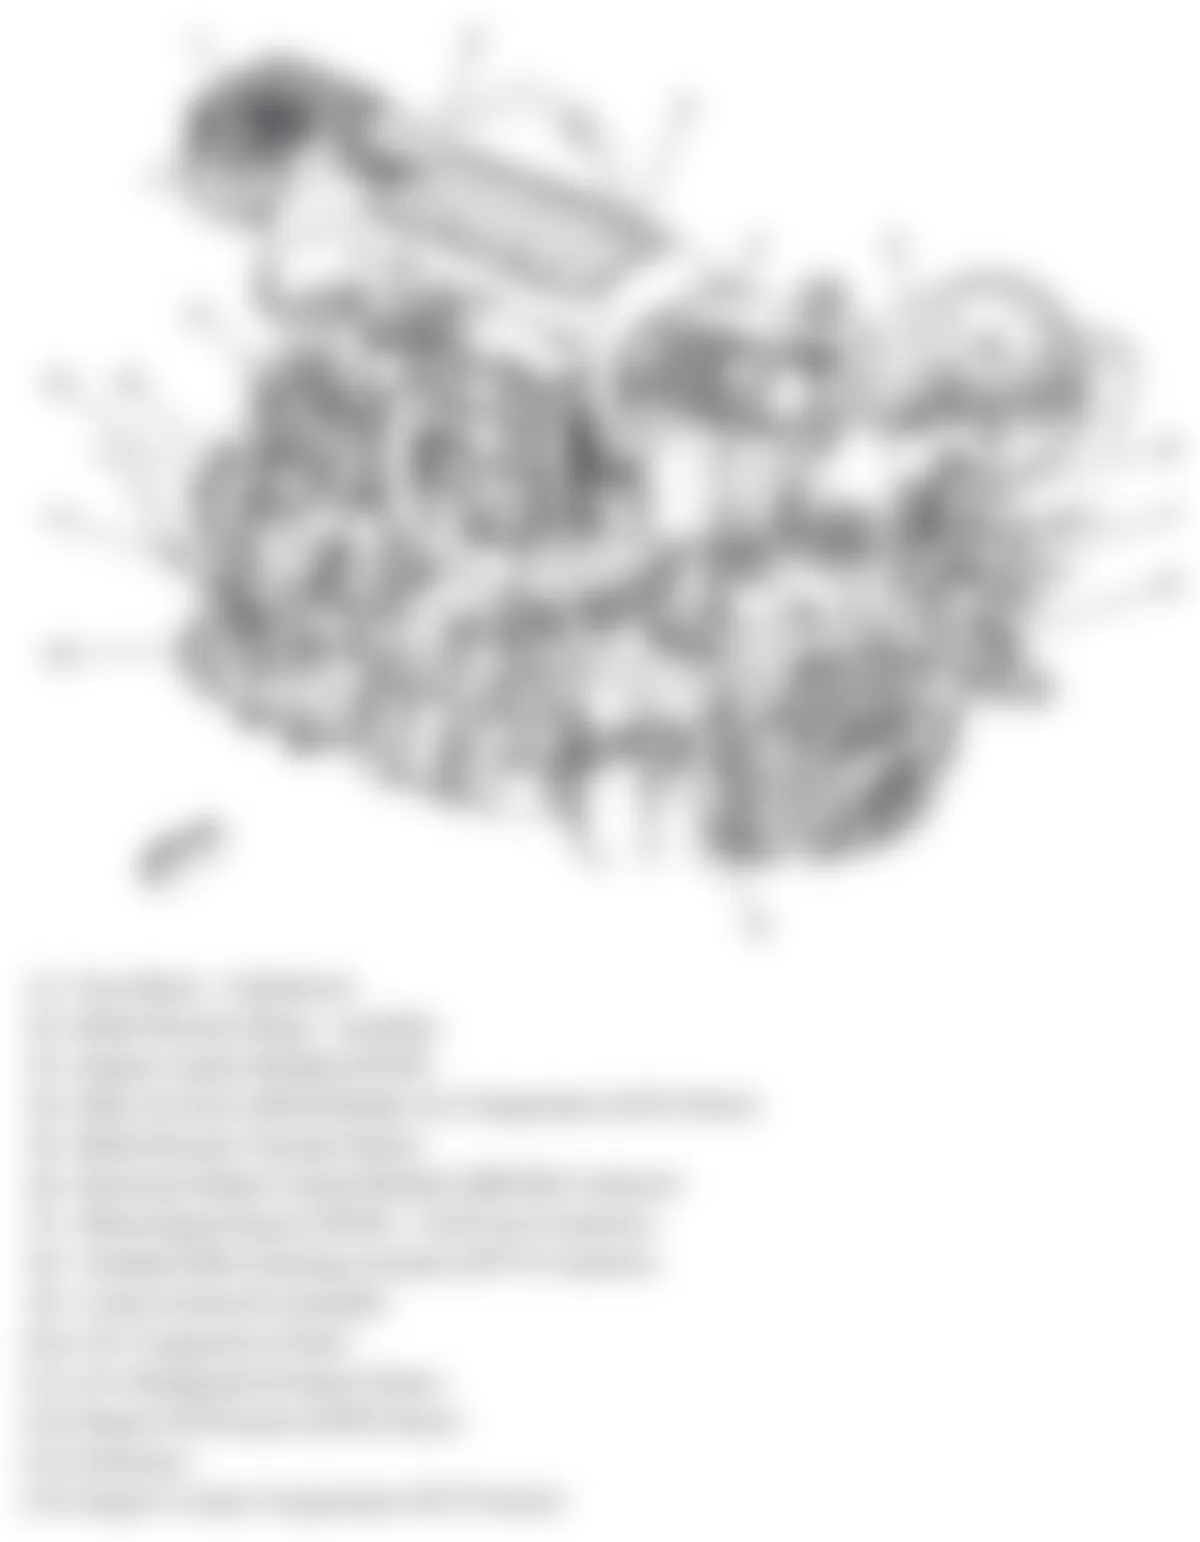 GMC Acadia SL 2010 - Component Locations -  Left Side & Rear Of Engine